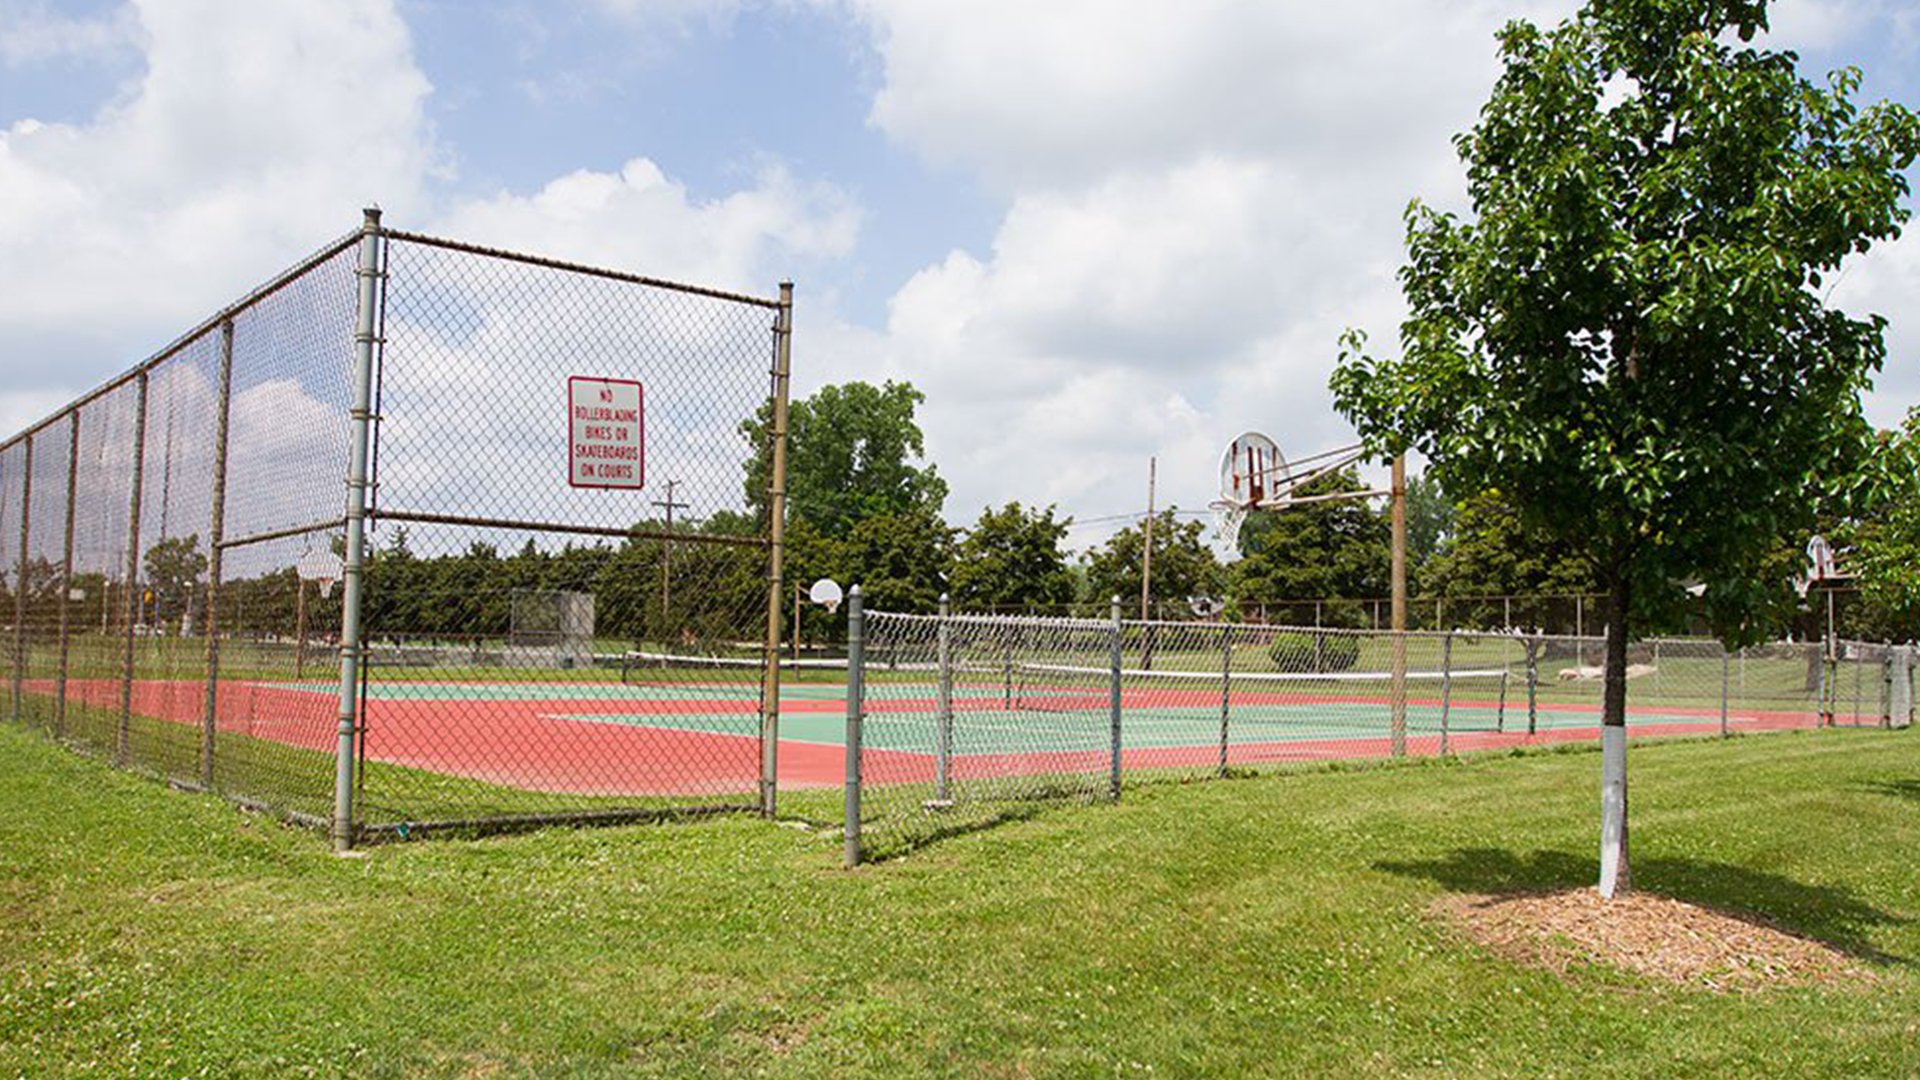 This is a picture of Hastings Bob King Park